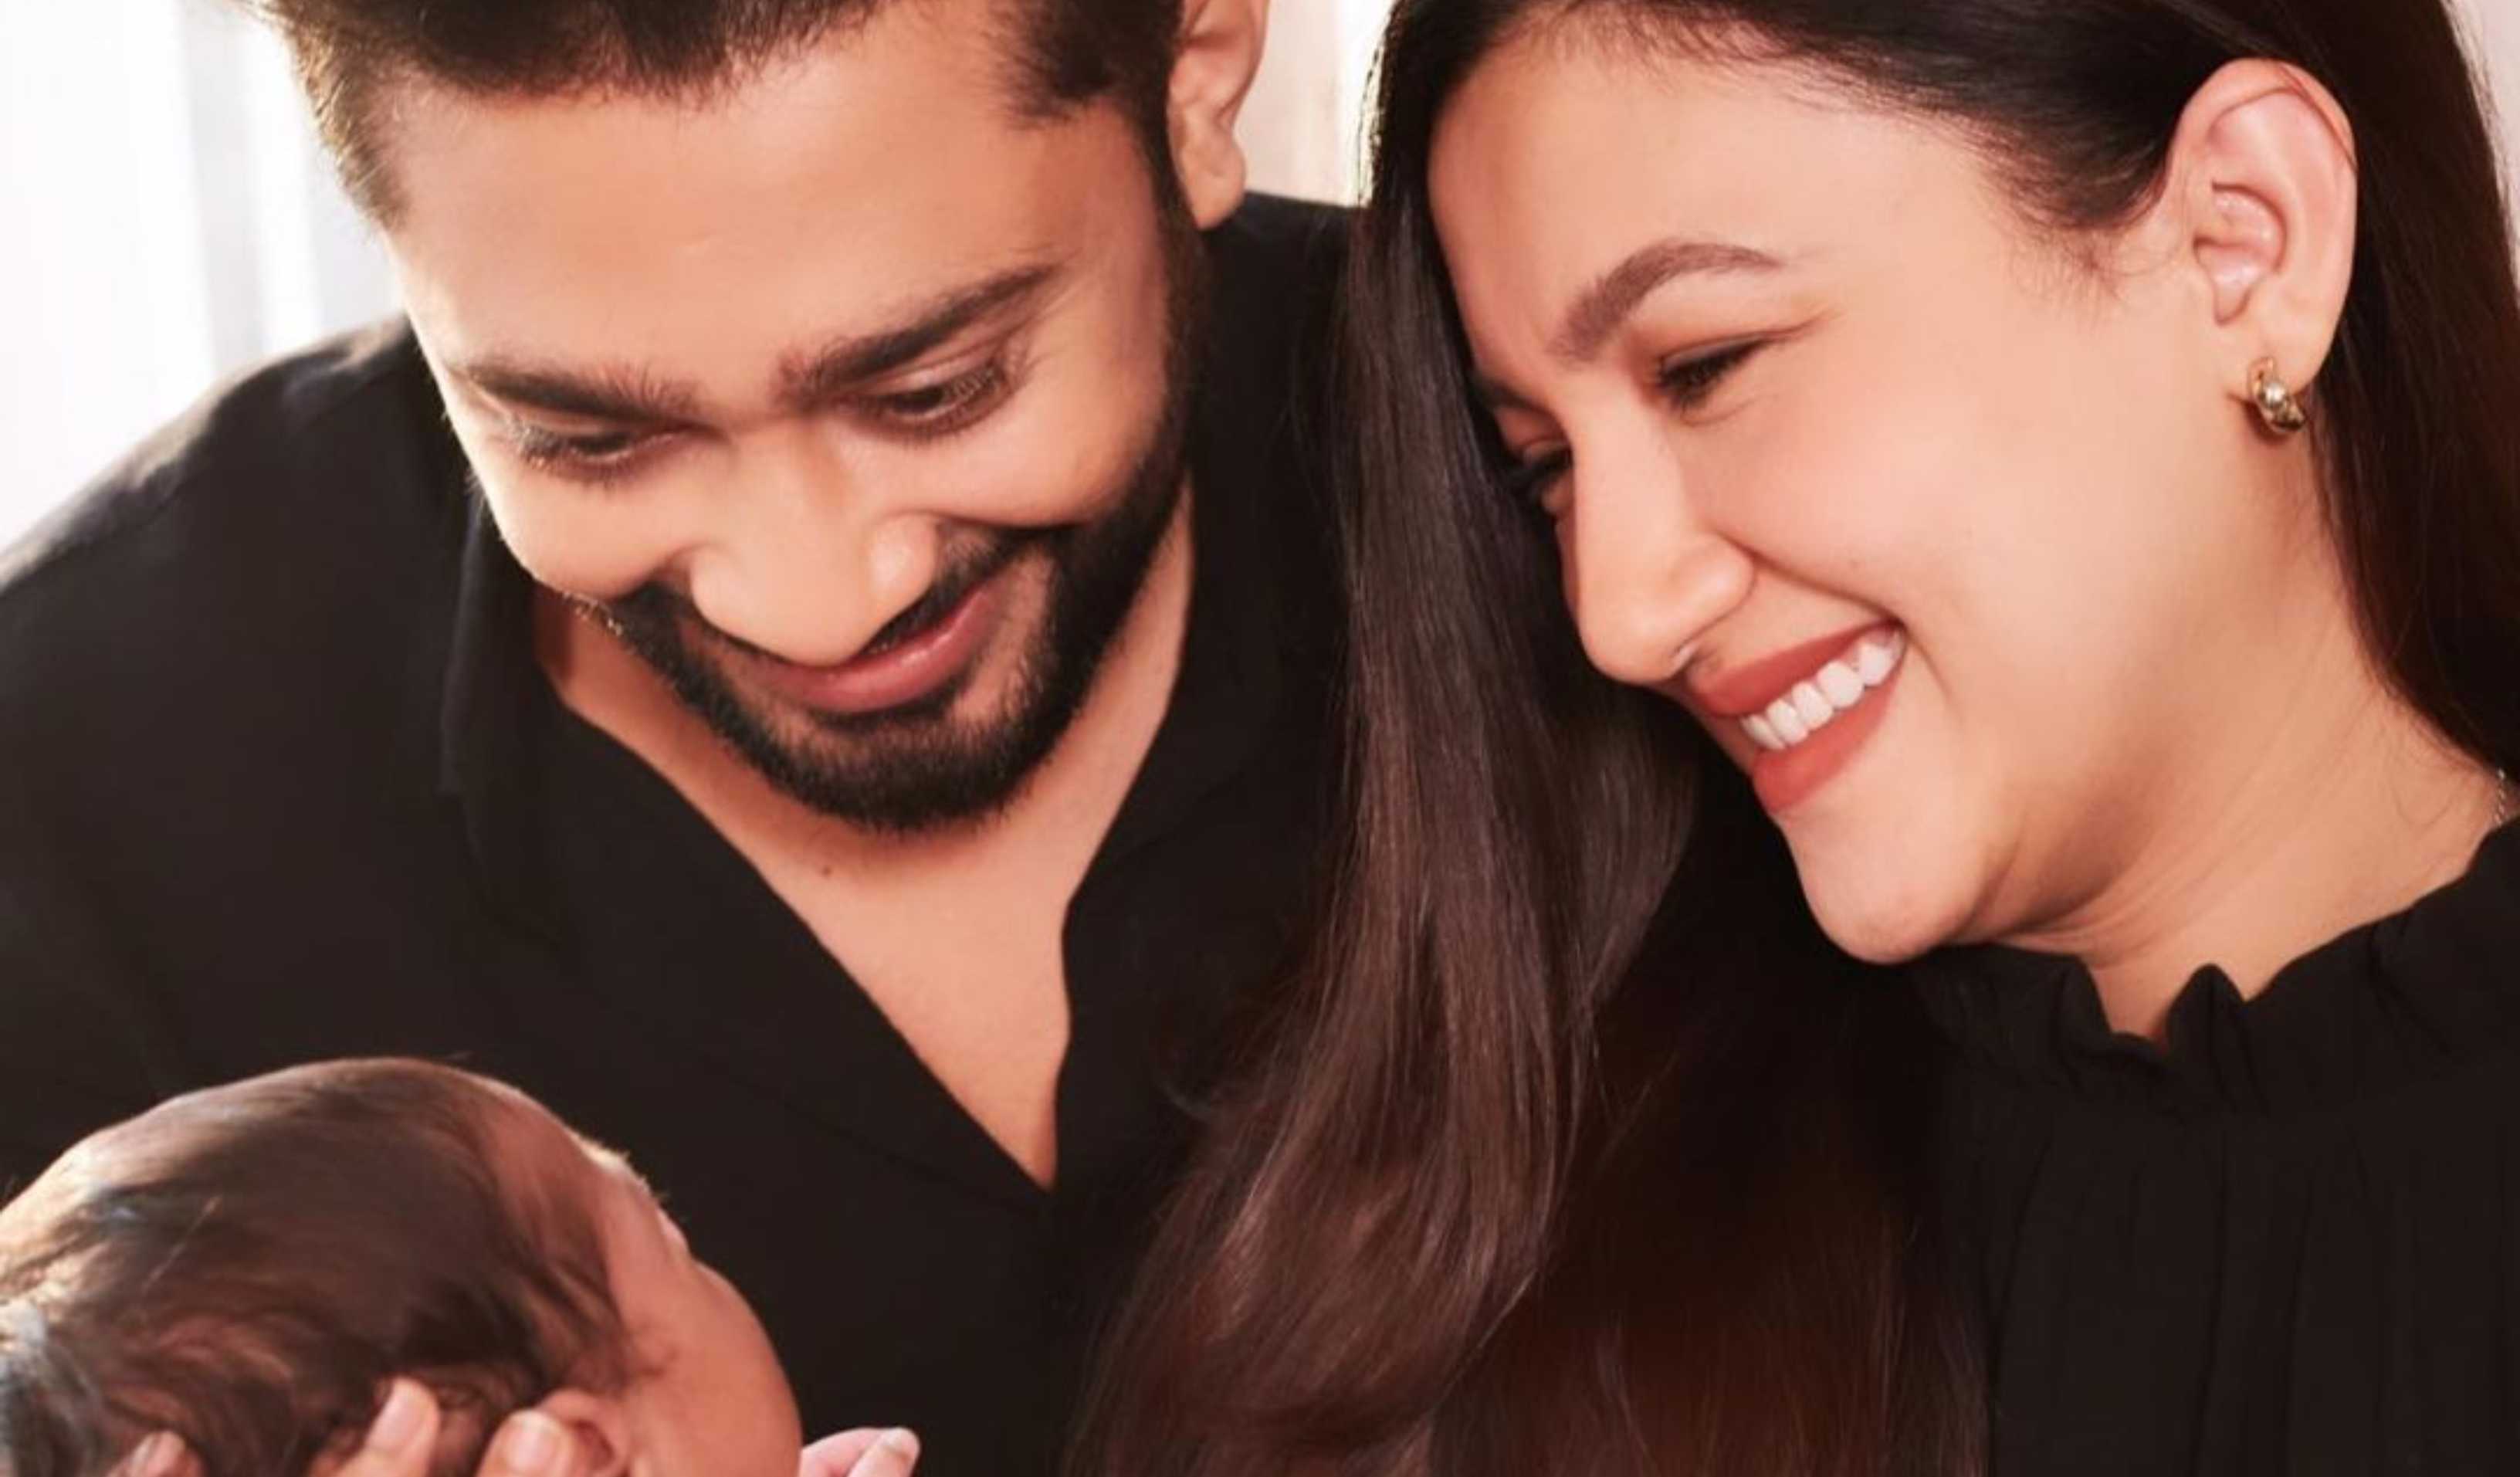 Gauahar Khan and Zaid Darbar reveal first picture of their son, announce his name as he turns a month old